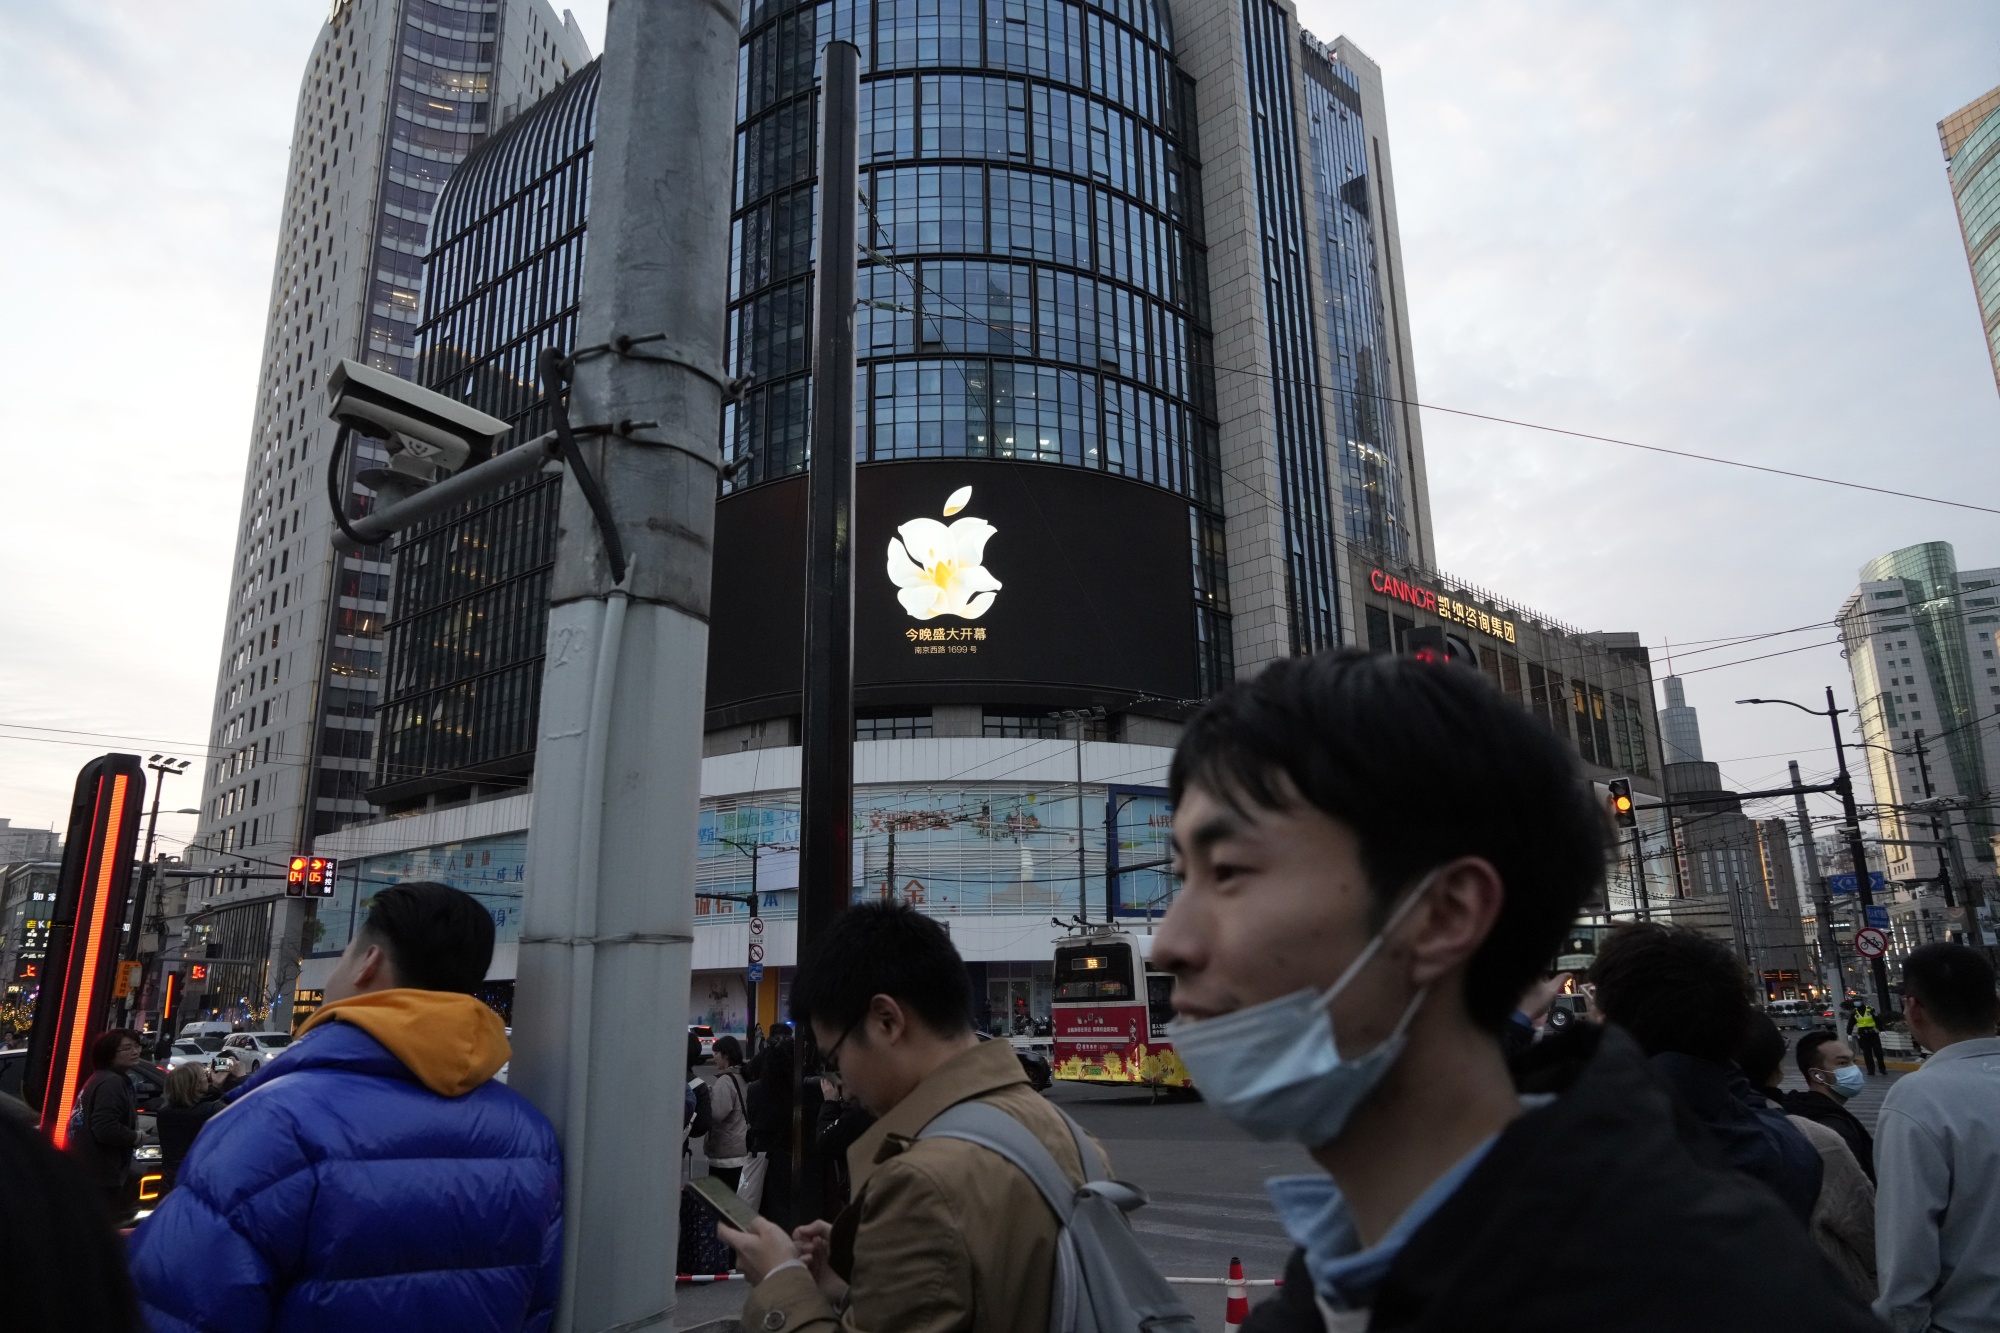 An ad for the opening of an Apple store in Shanghai.